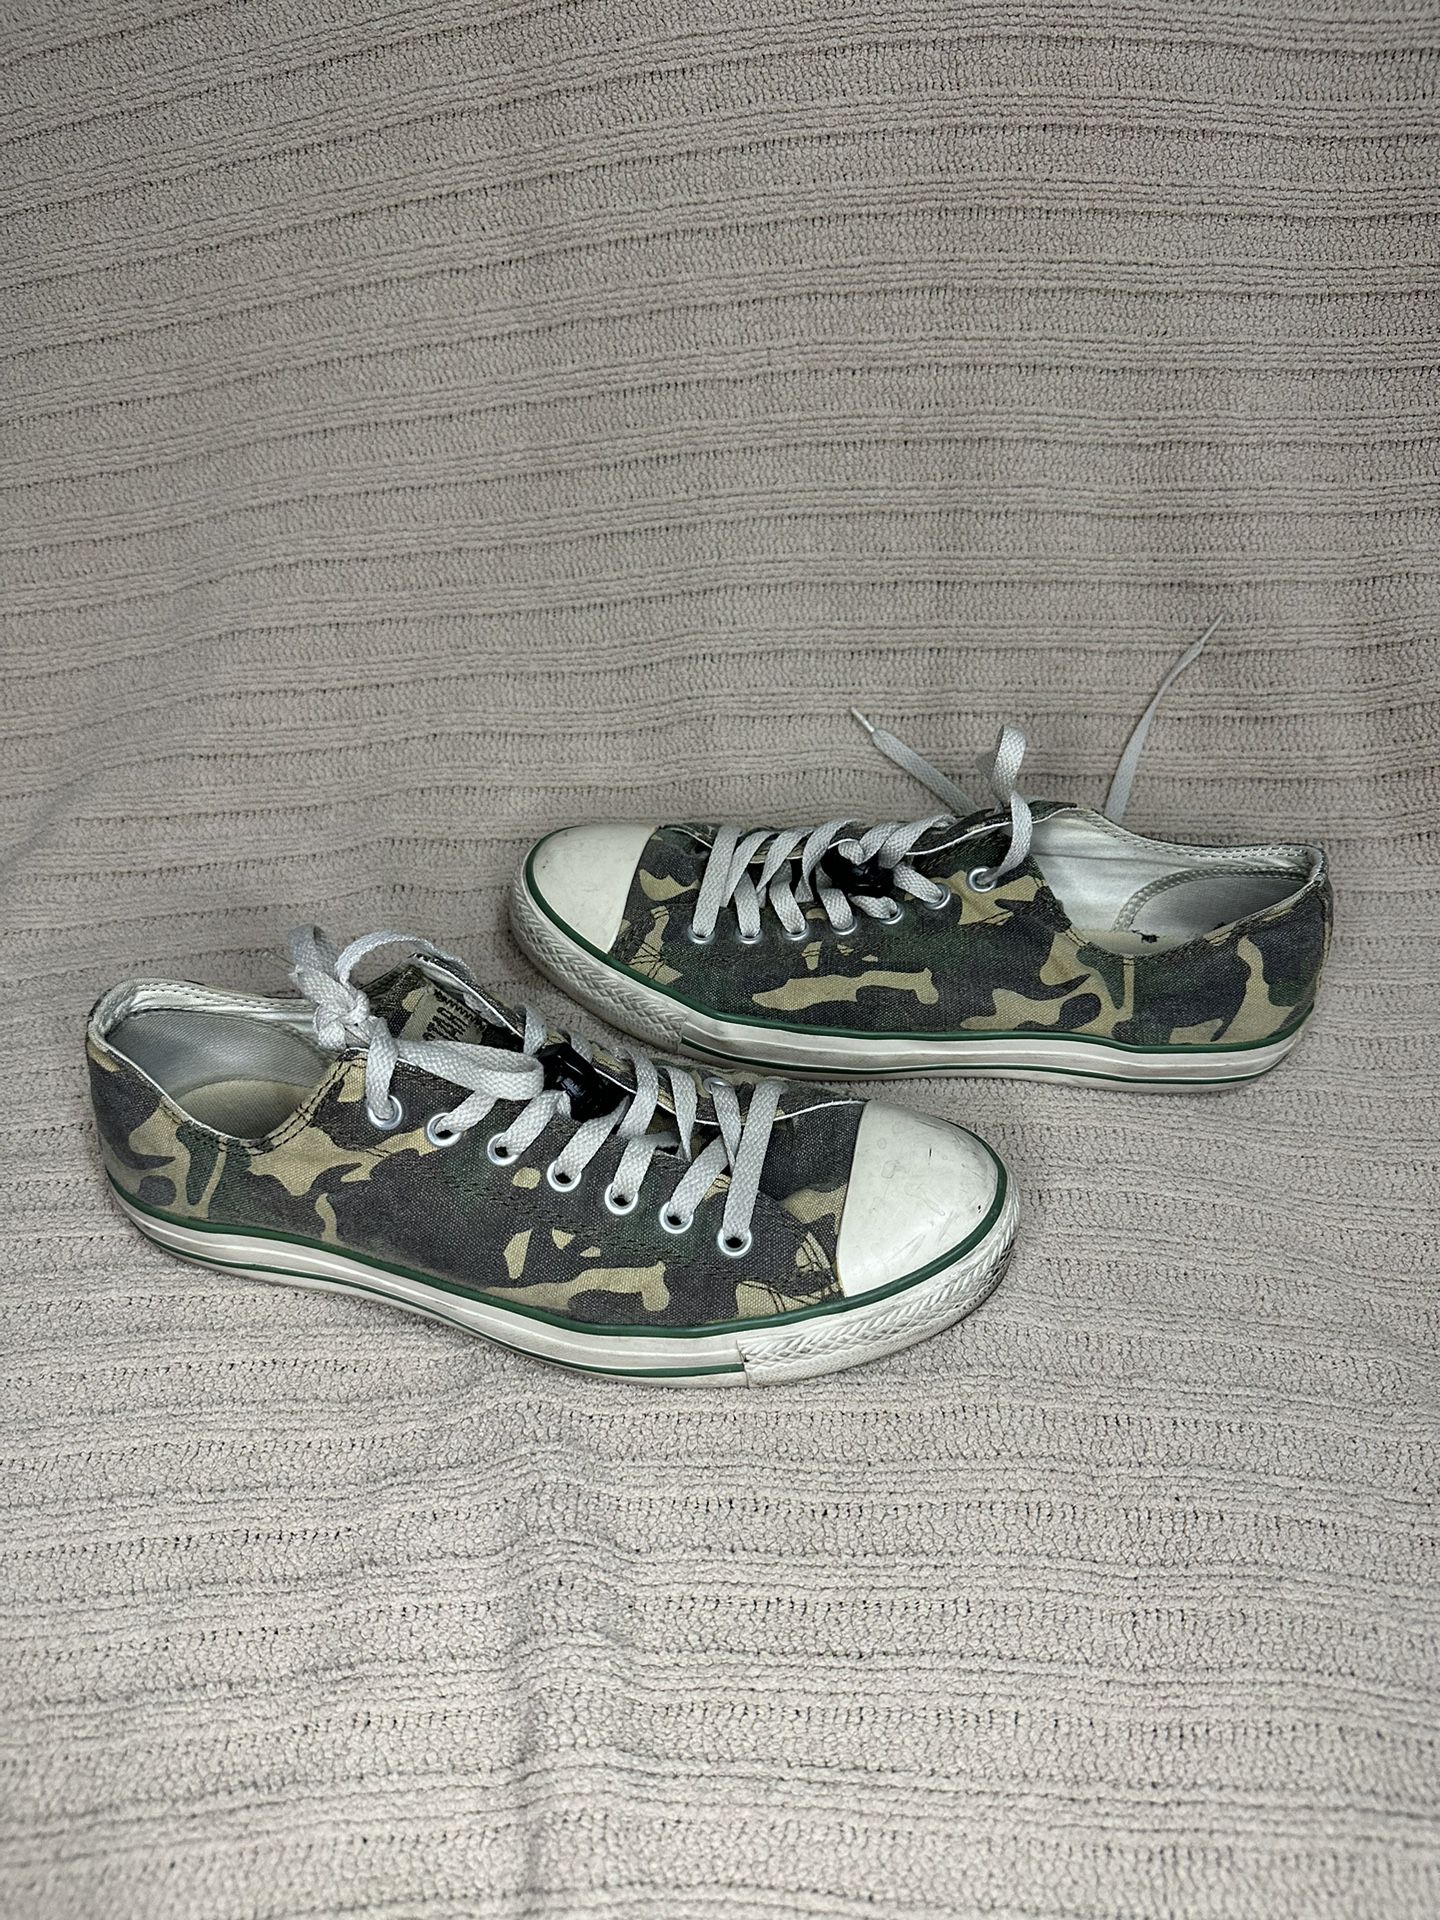 Converse Chuck Taylor All Star Low Army Camo Green Forest Grenade Lace Lock M10